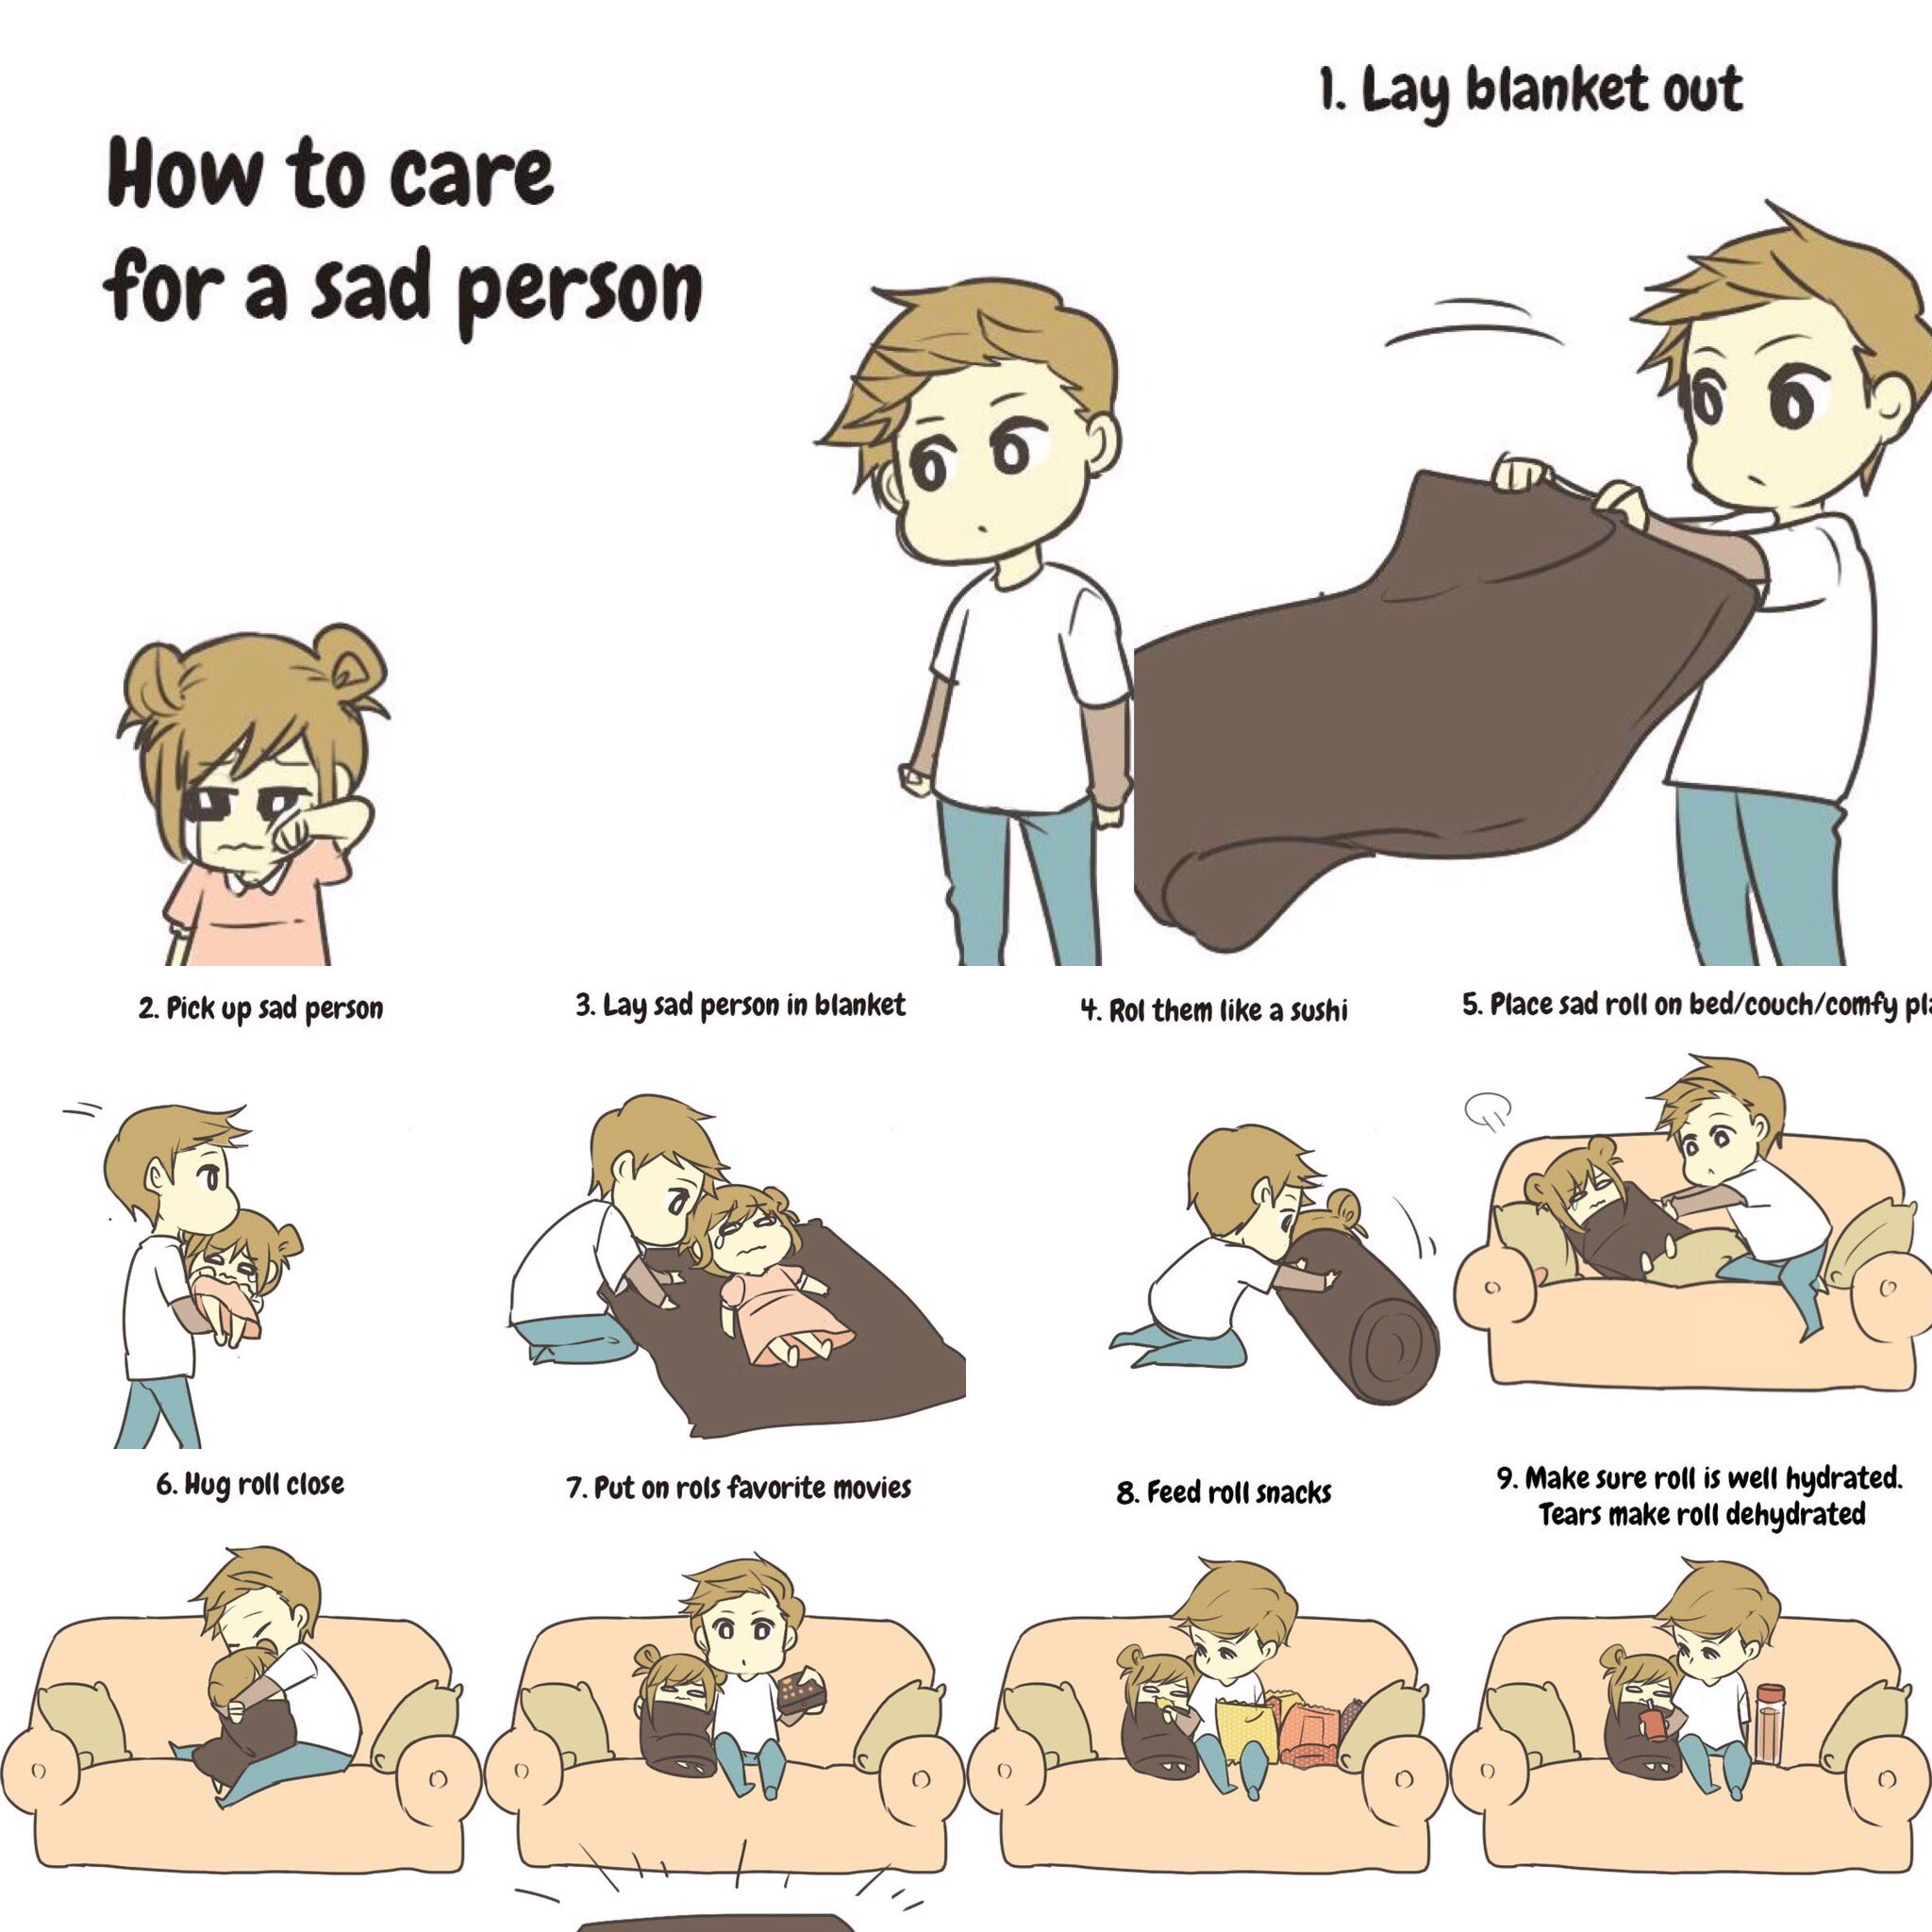 “Tips on " How to care for a sad person . "